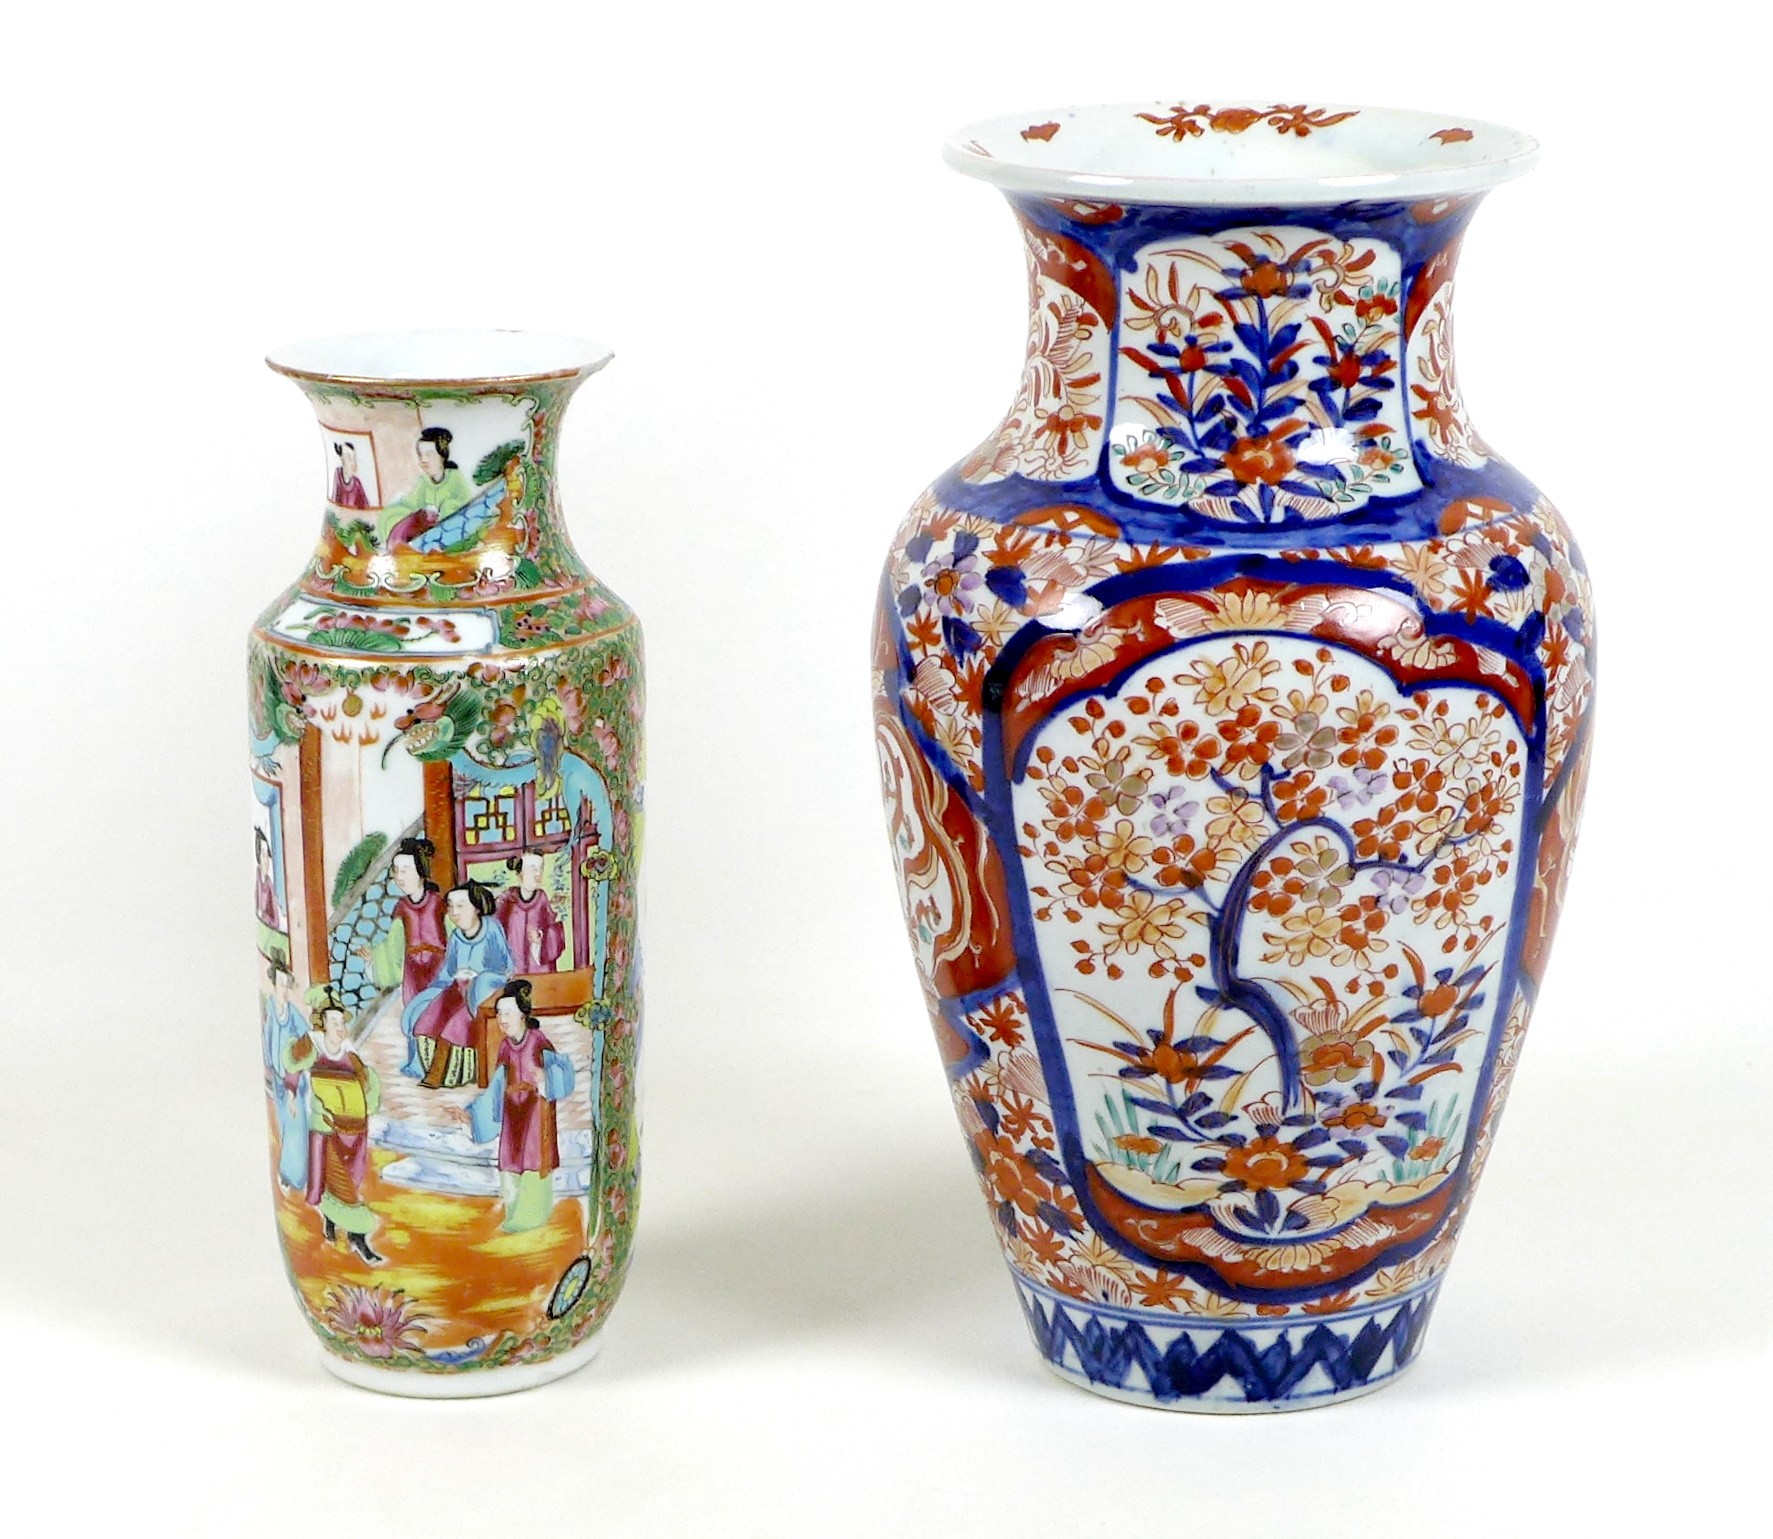 A Canton porcelain vase, Qing Dynasty, late 19th century, typically decorated with reserves of